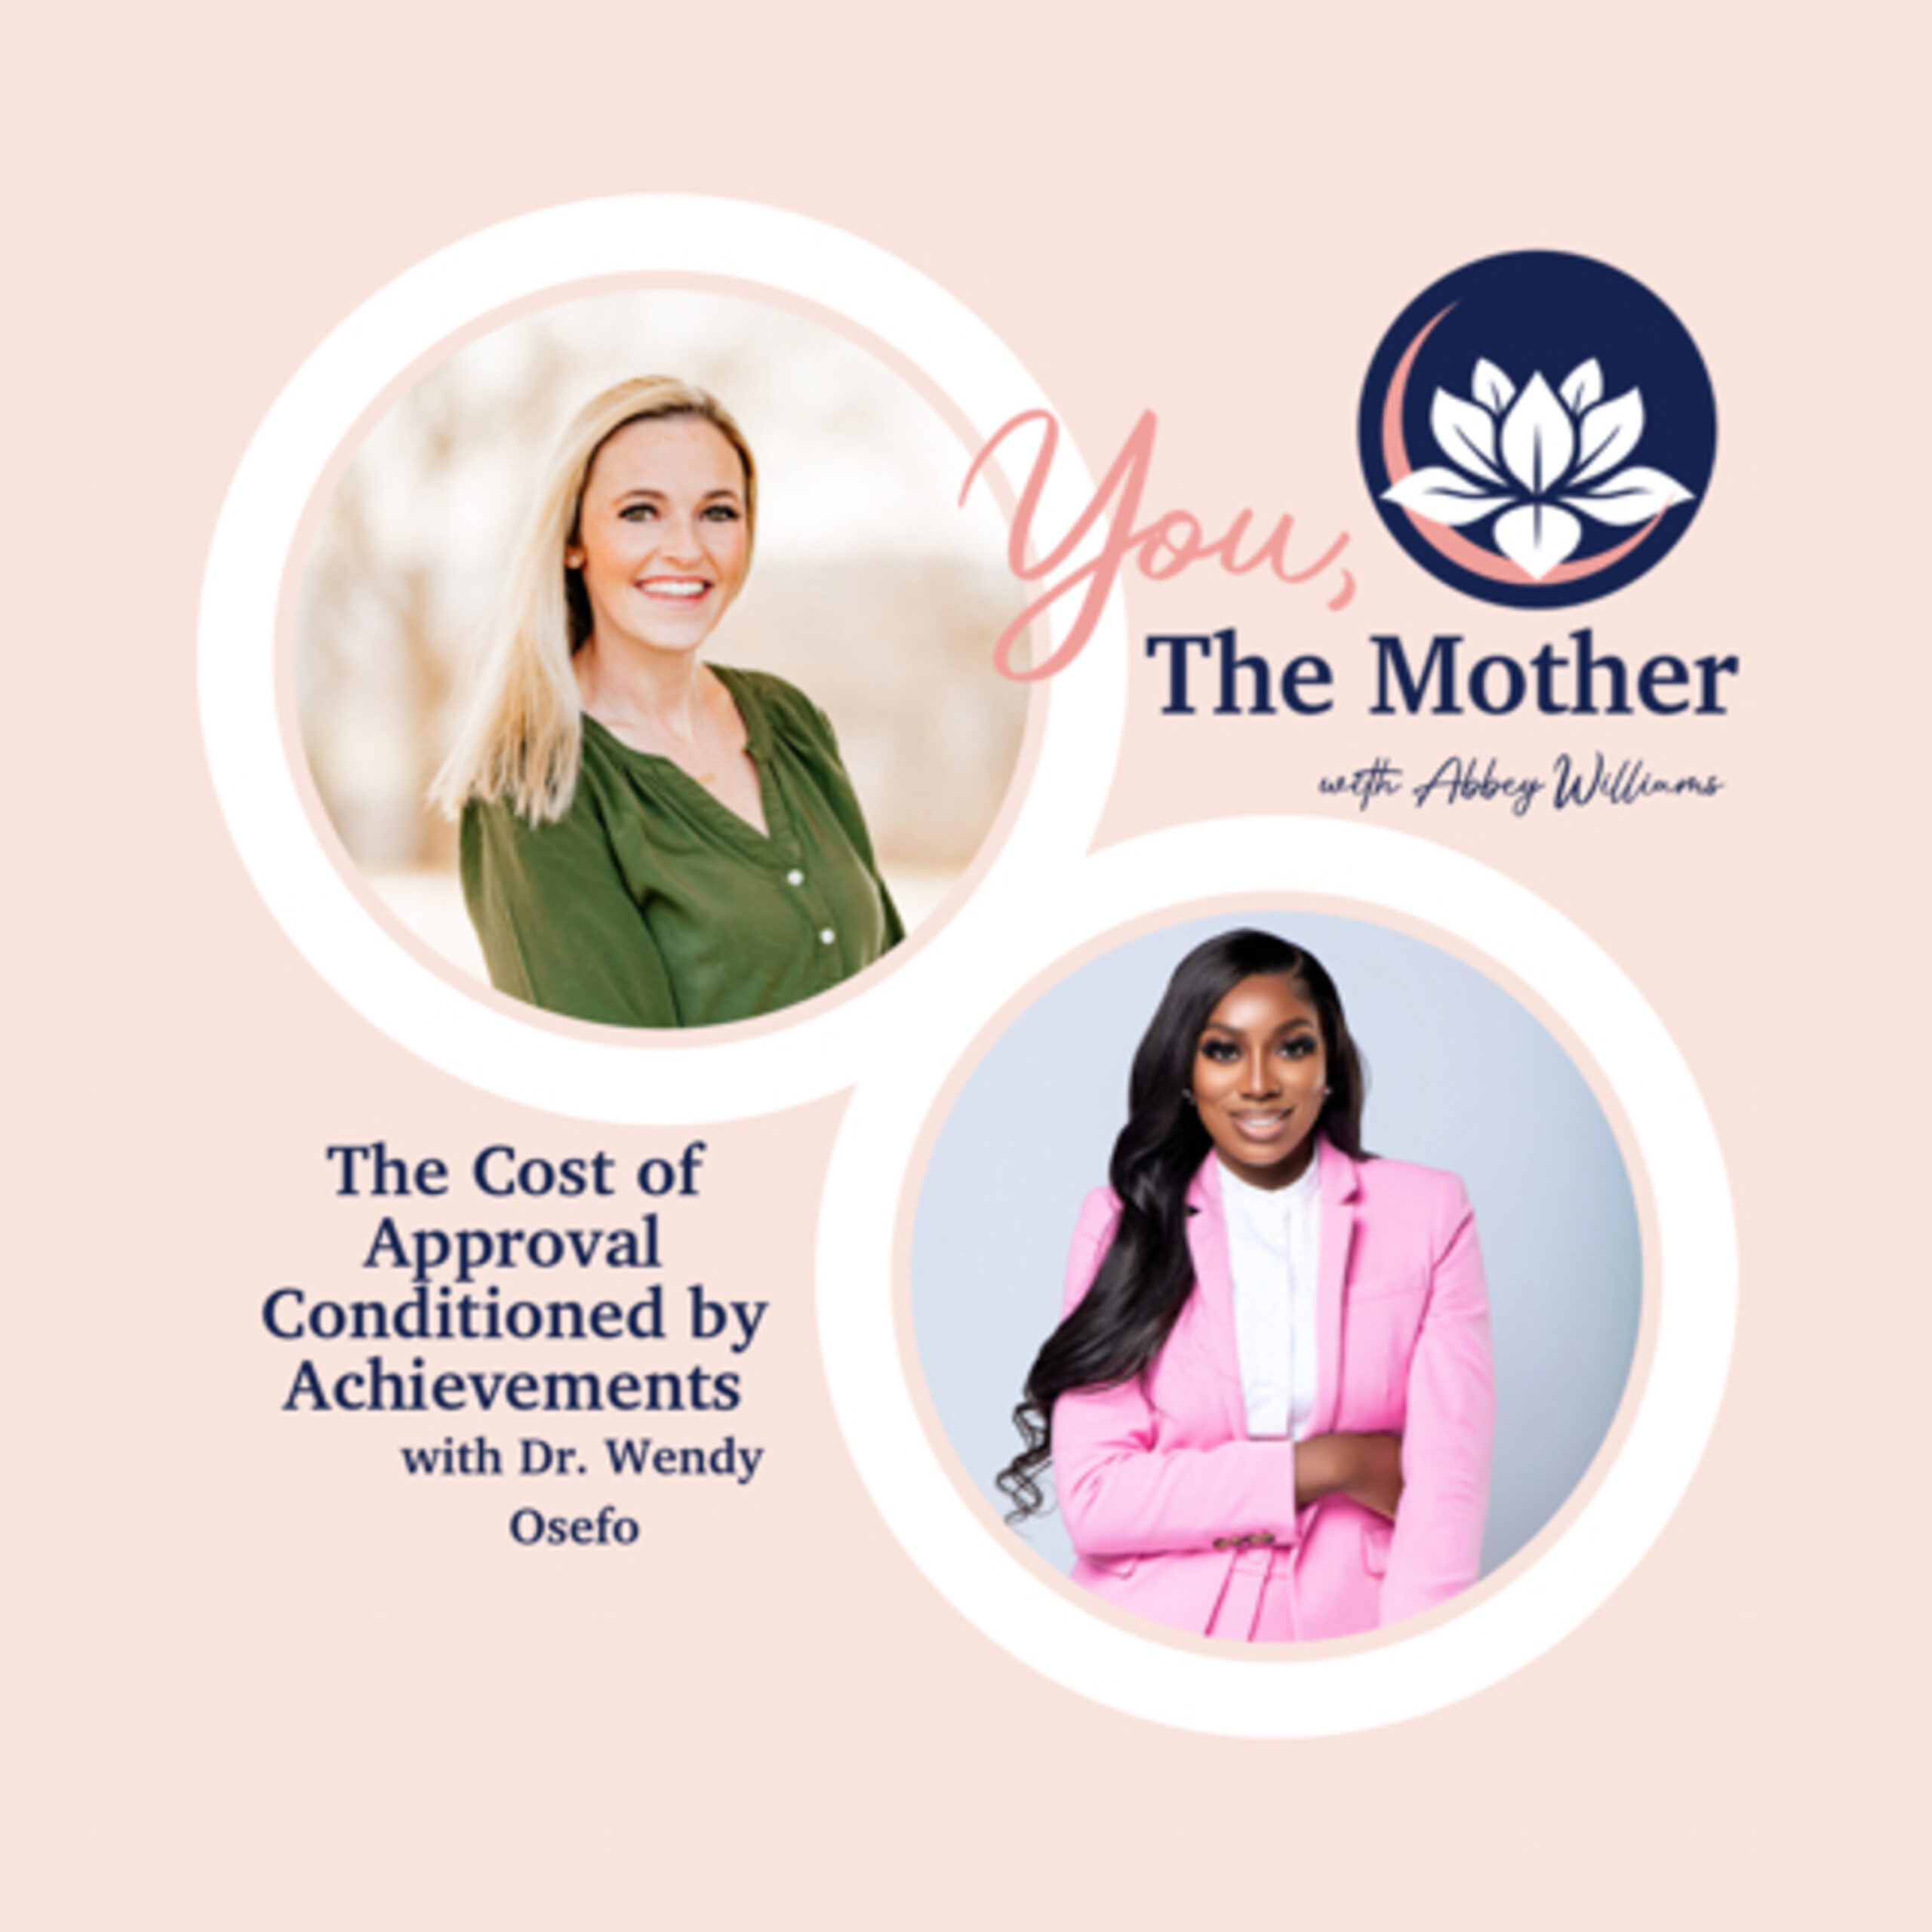 The Cost of Approval Conditioned by Achievements with Dr. Wendy Osefo